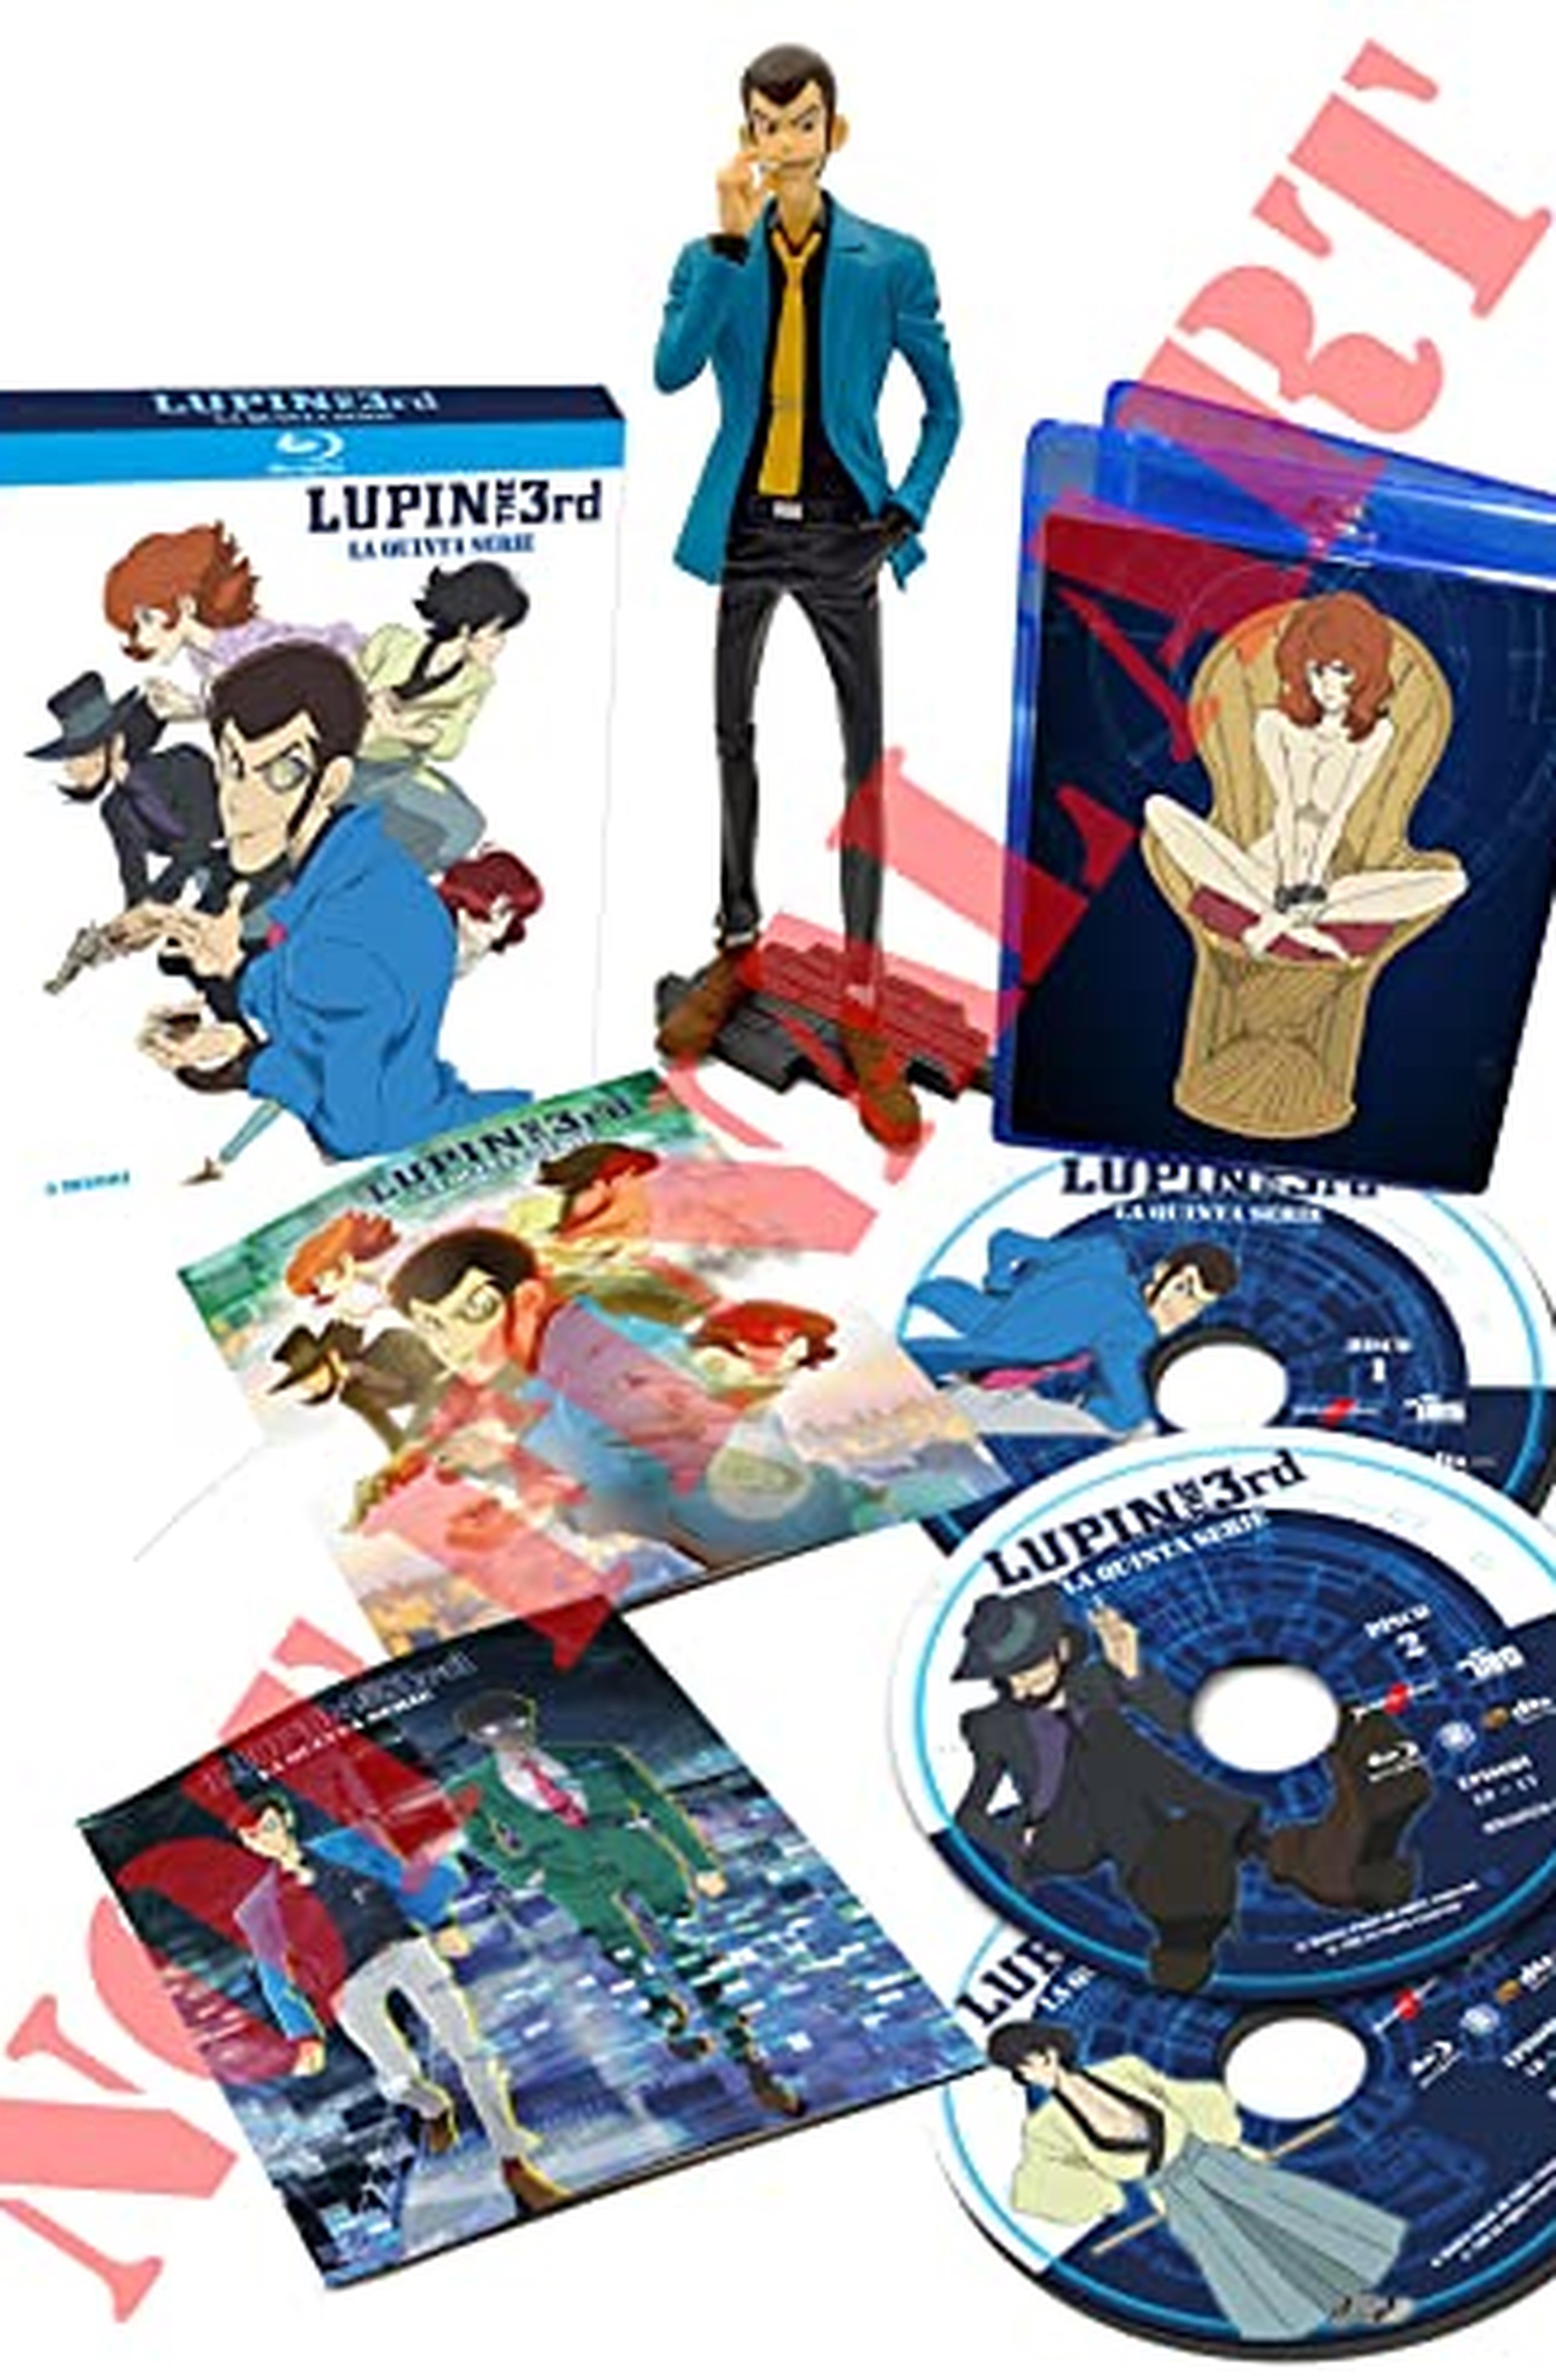 Lupin III- La Quinta Serie - Limited Ed. Bd (3 Bd) + Action Figure Lupin